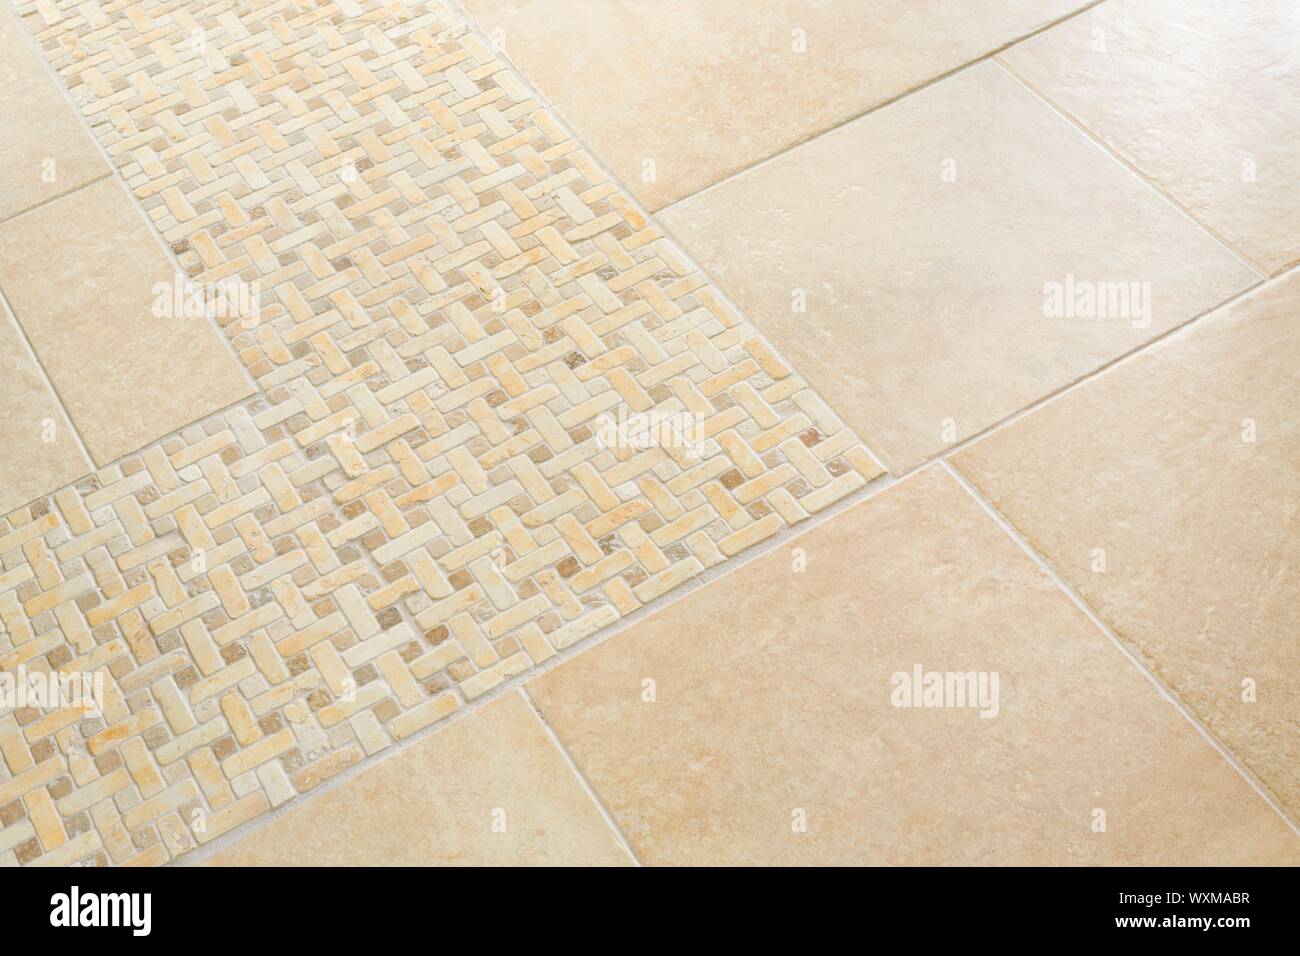 Floor tiles in a home interior with neutral sandstone  porcelain tiles and a mosaic accent Stock Photo